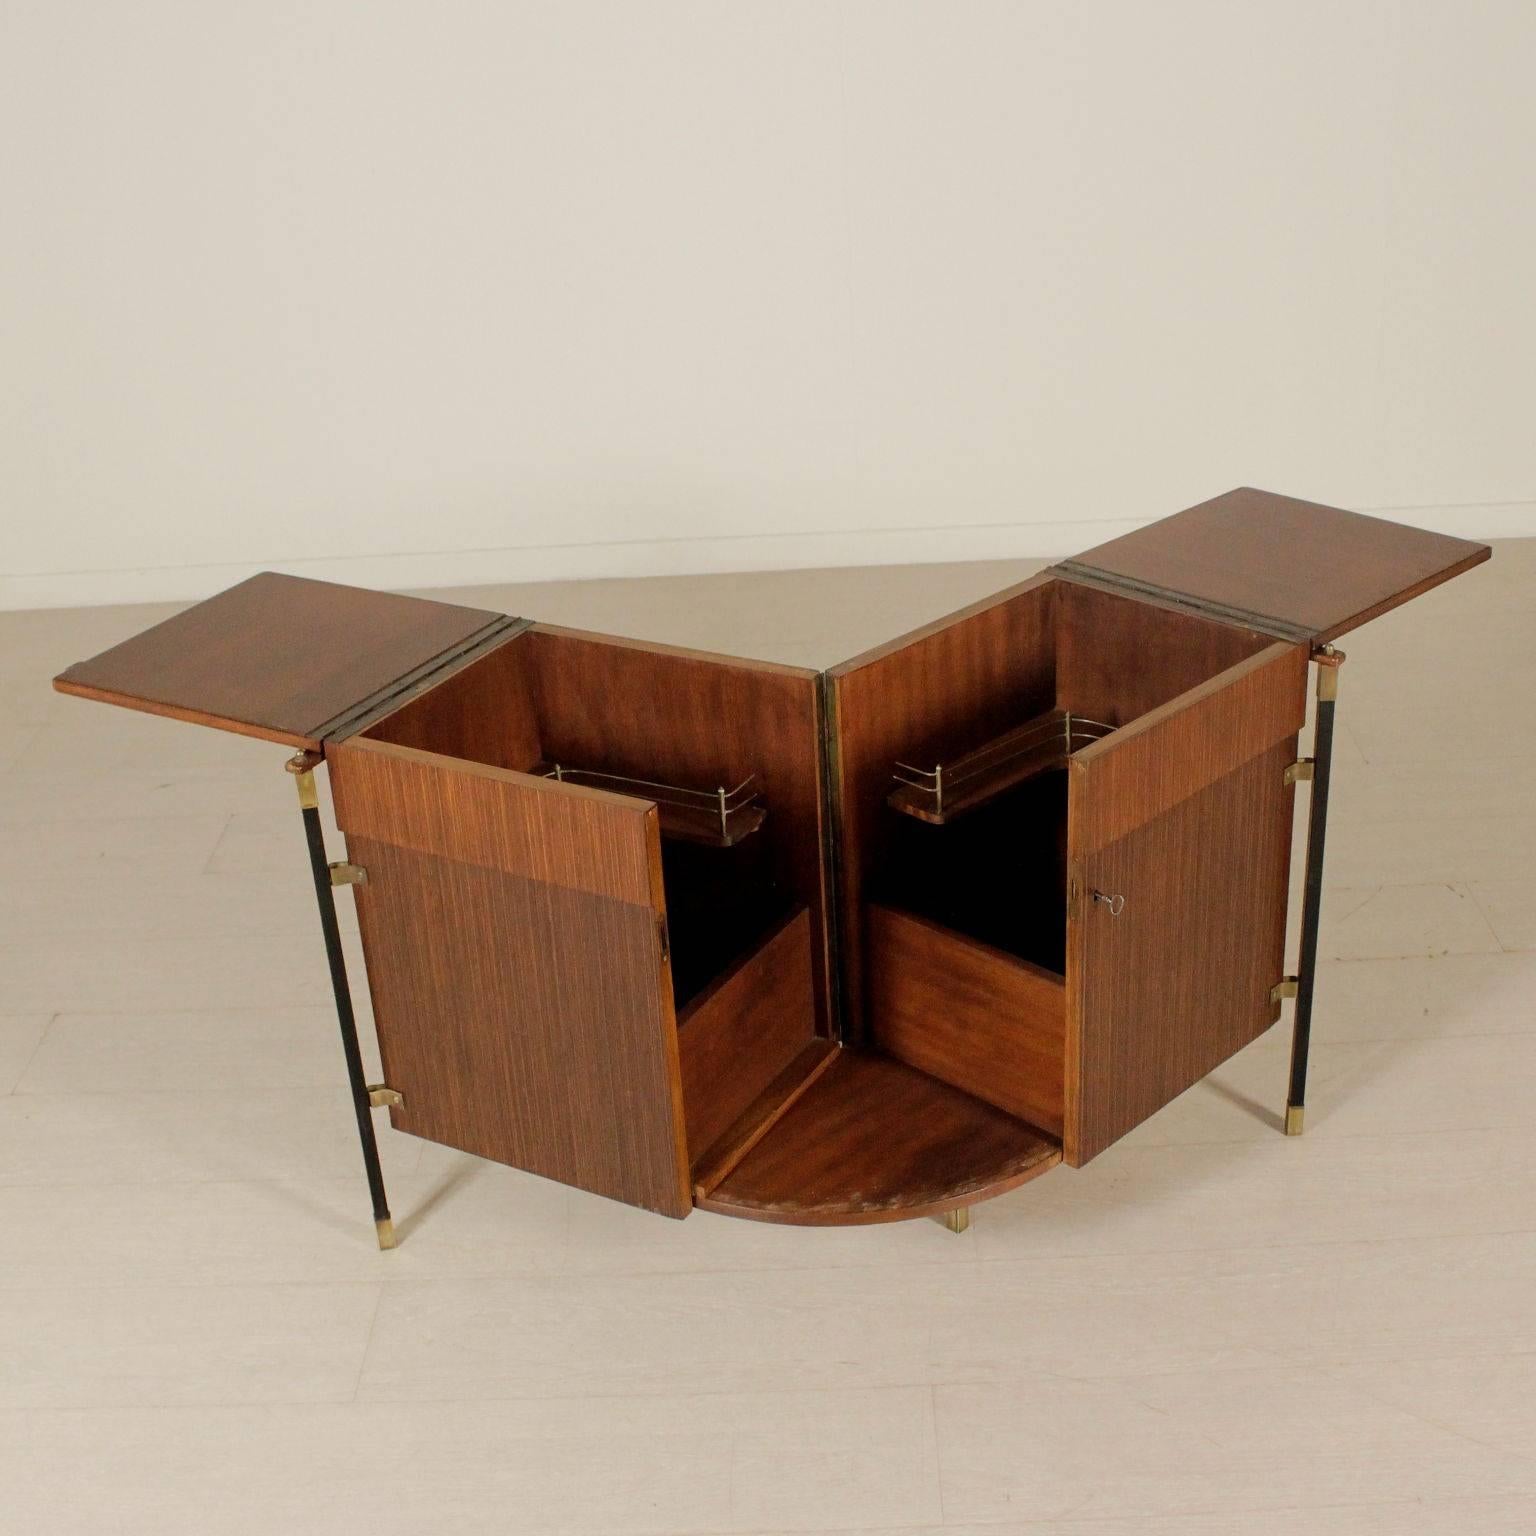 A foldable bar cabinet, rosewood veneer, metal and brass. Manufactured in Italy, 1960s.